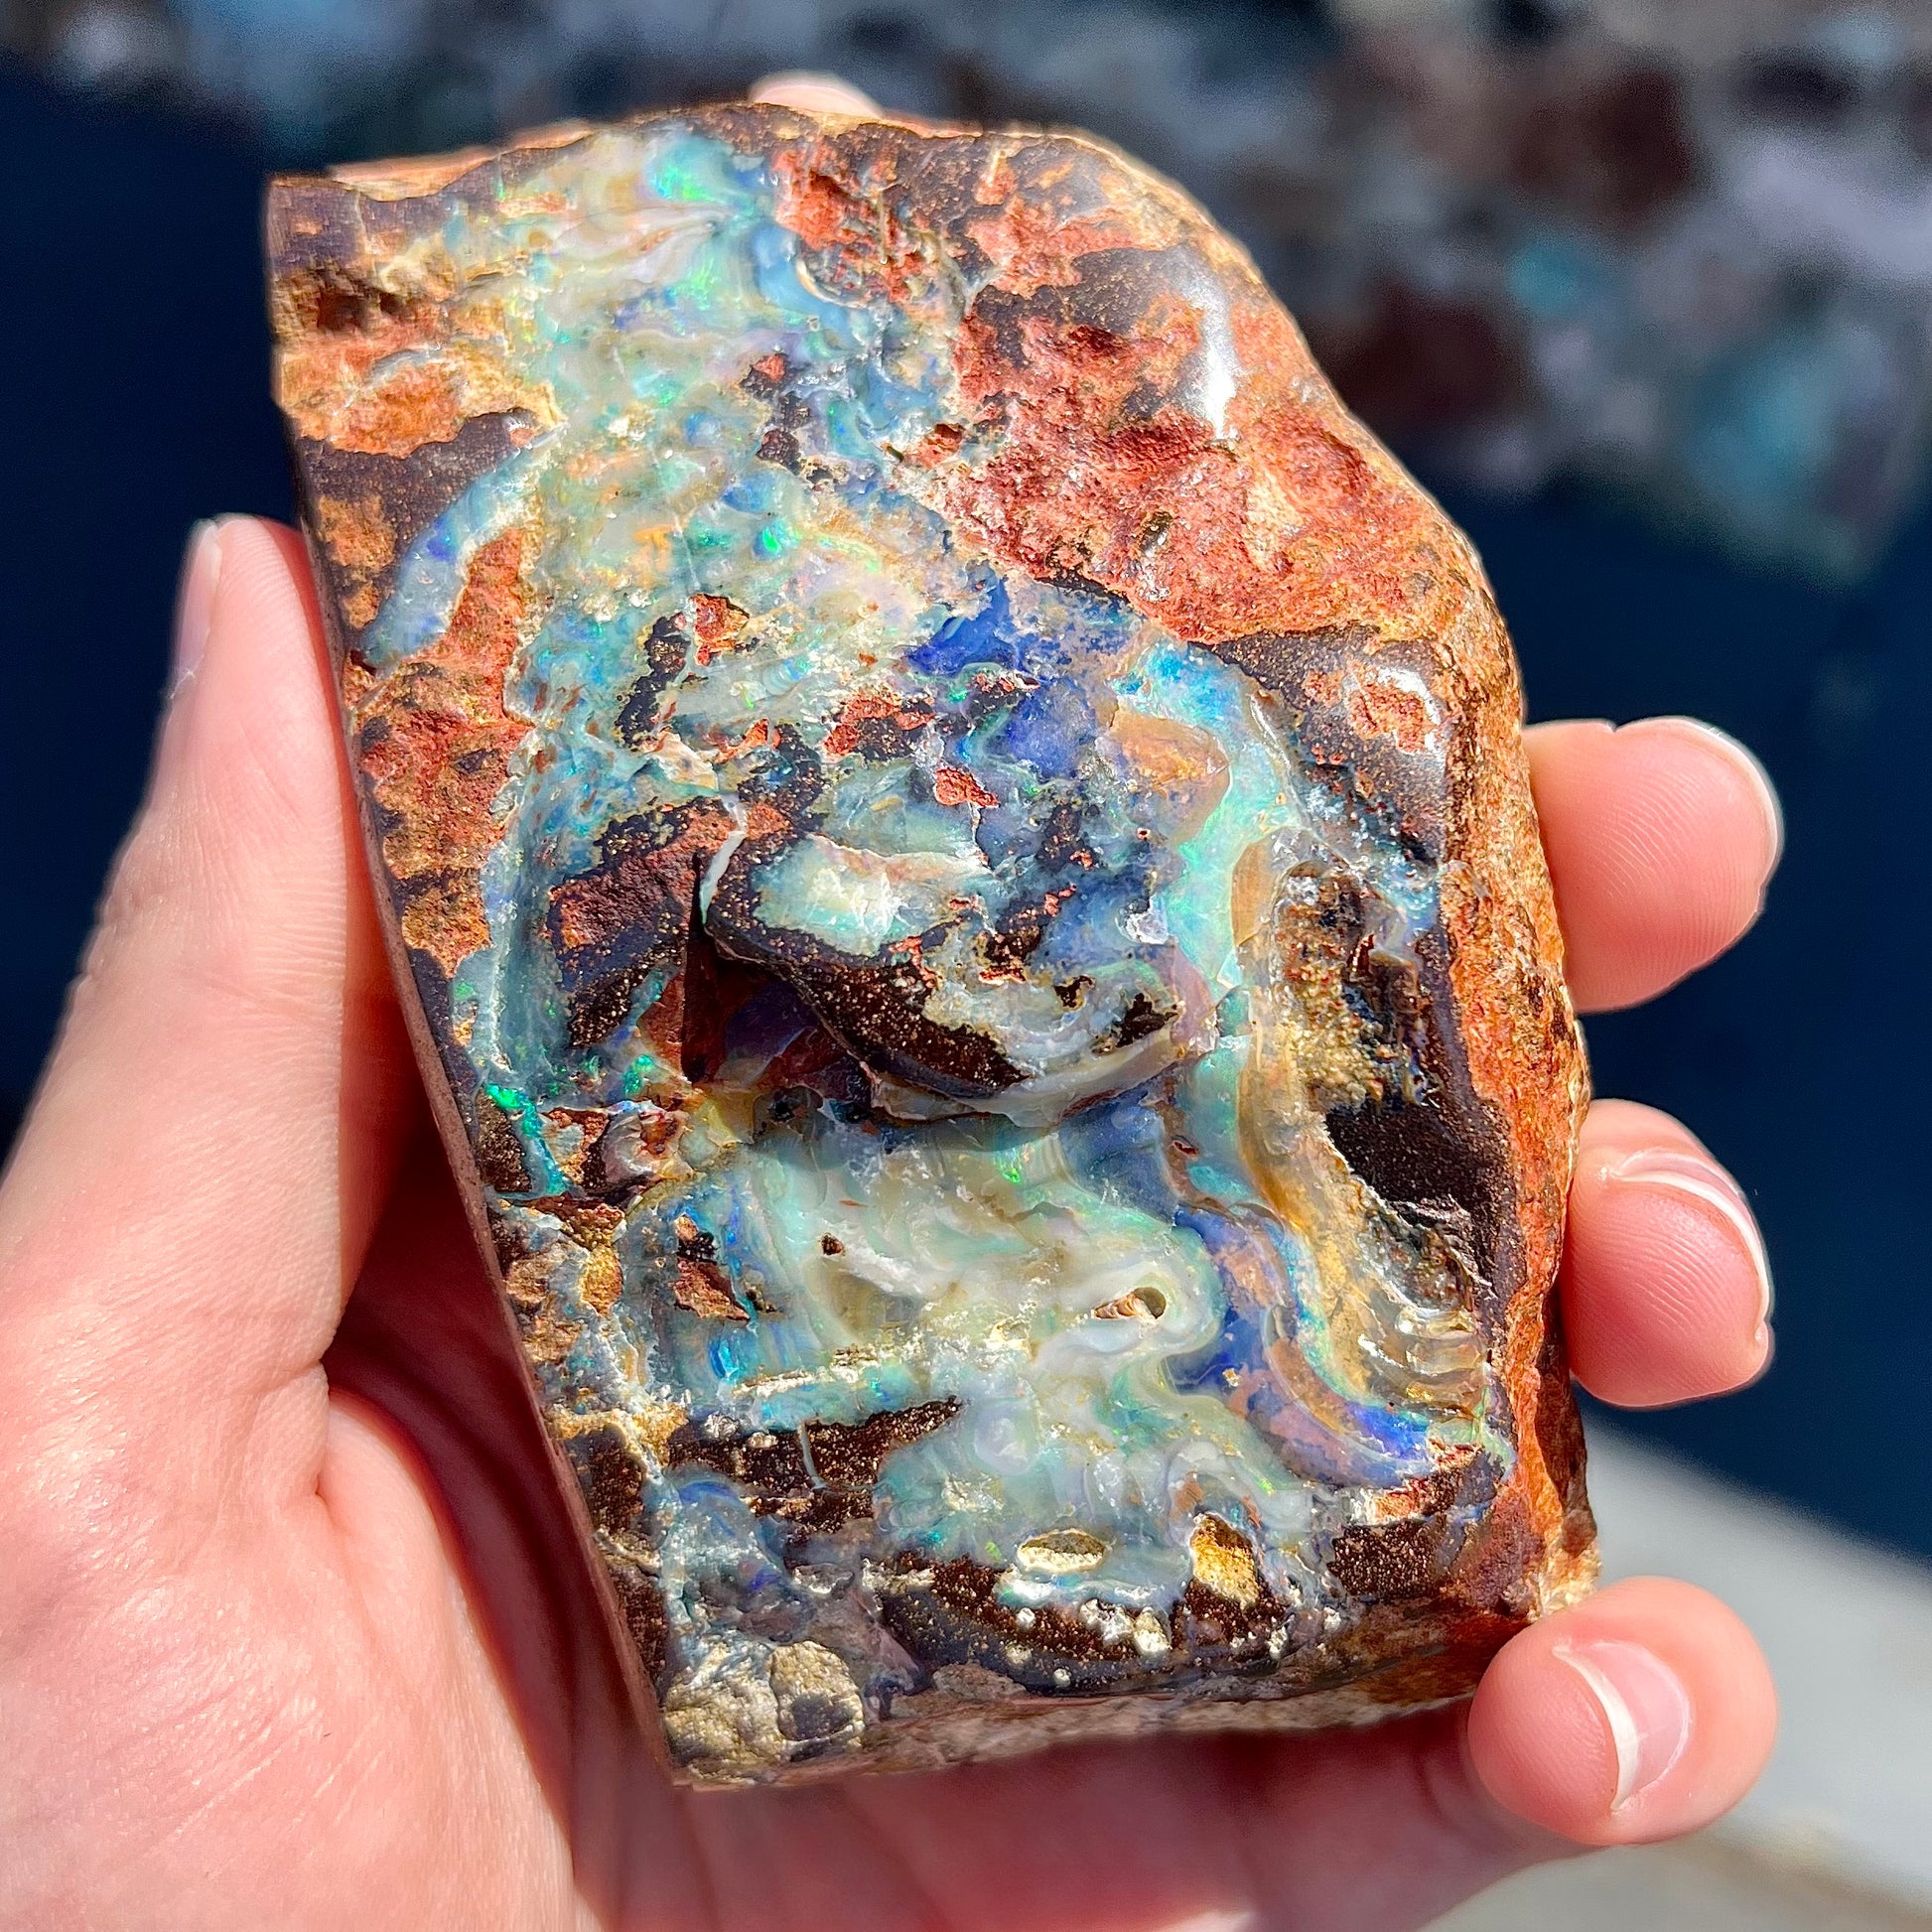 A hand-sized, polished Quilpie boulder opal specimen.  The stone shows blue, green, and orange flashes.